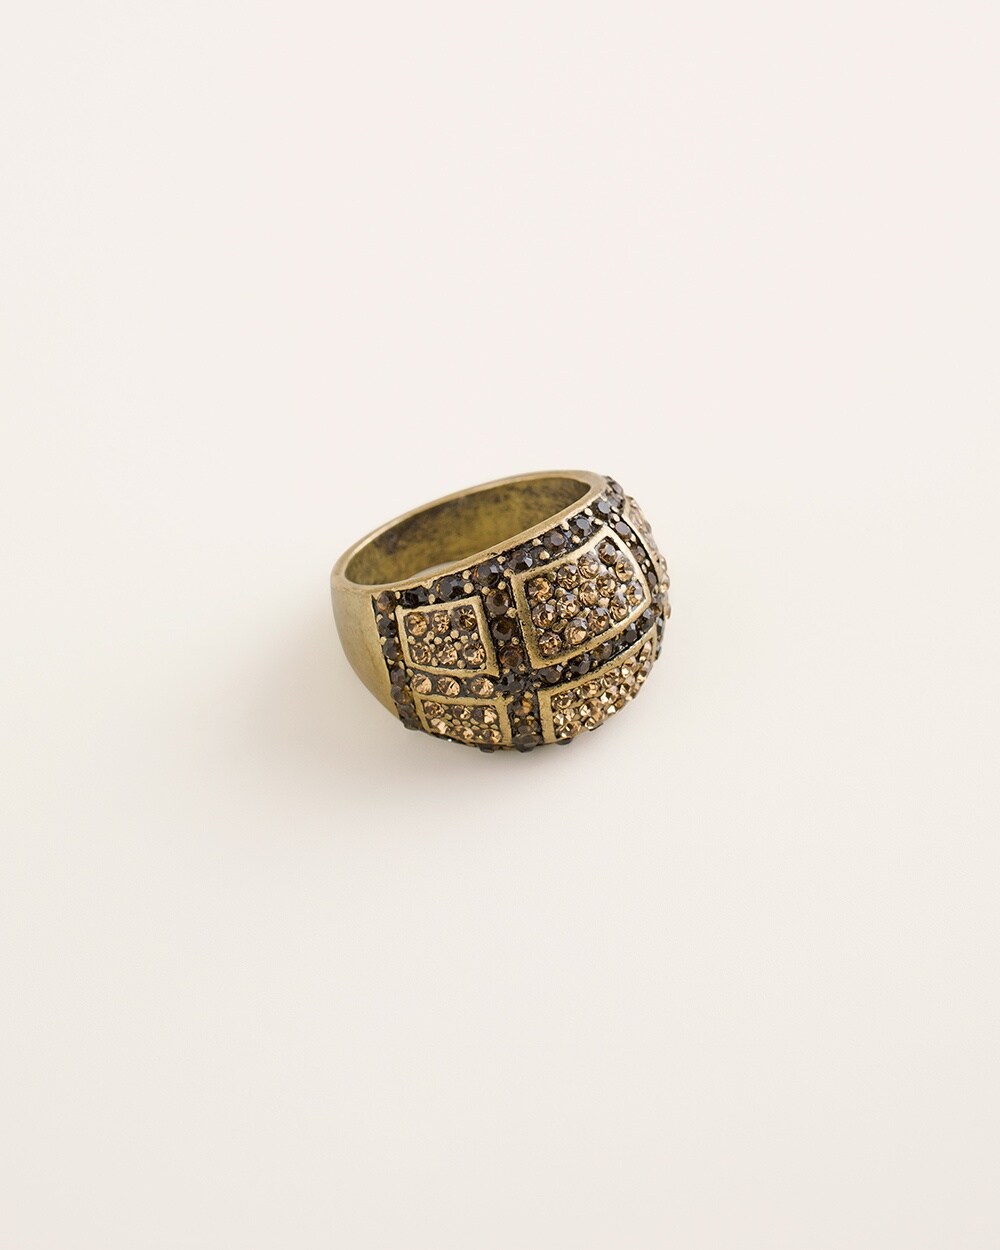 Goldtone and Faux-Hematite Ring